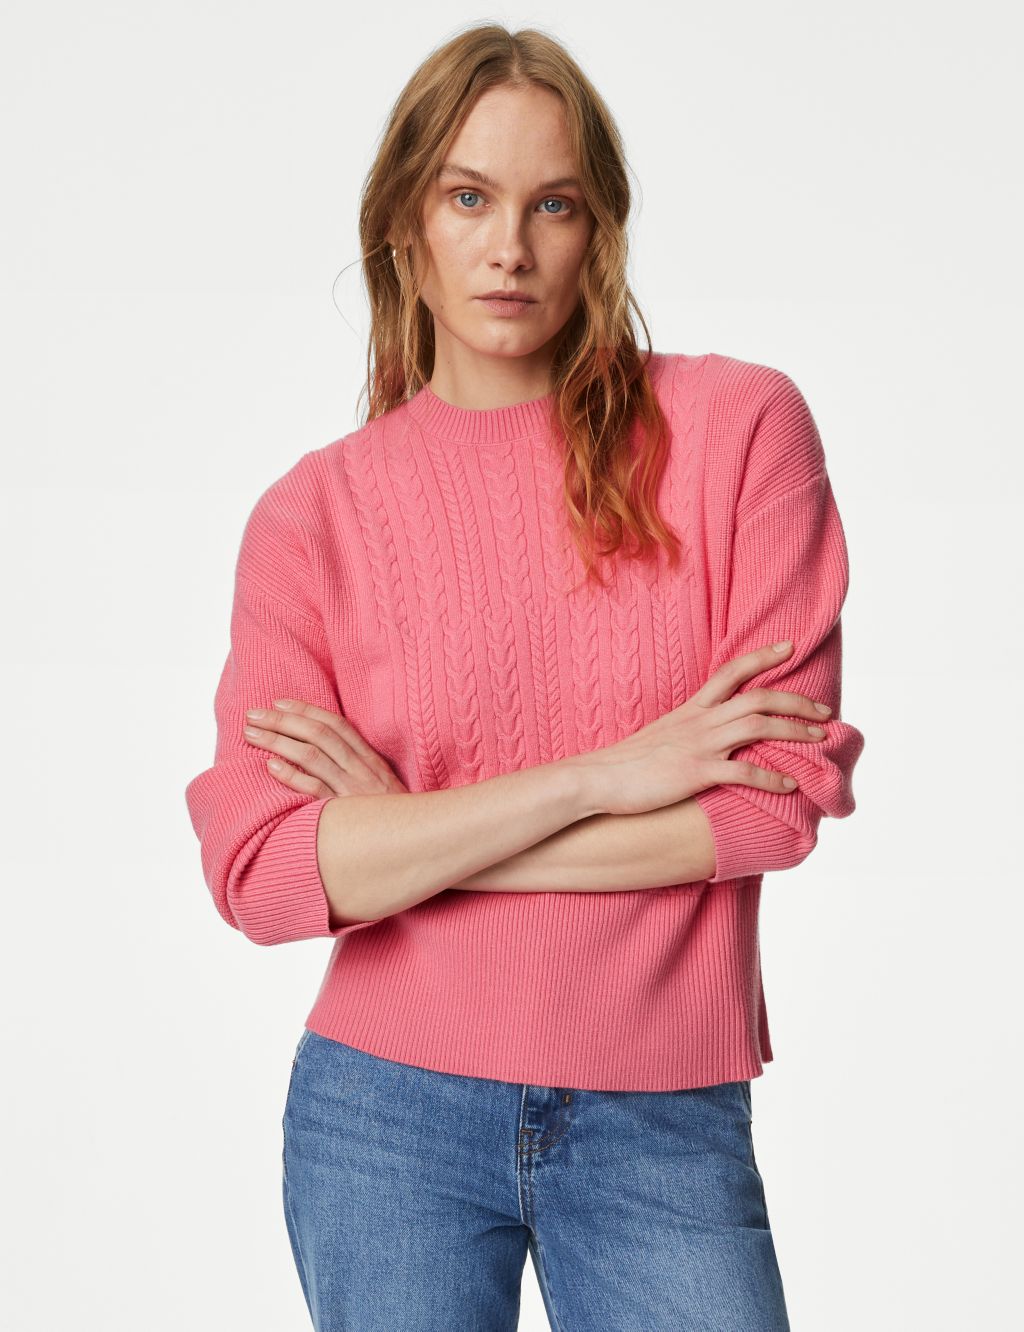 Soft Touch Textured Crew Neck Jumper image 4